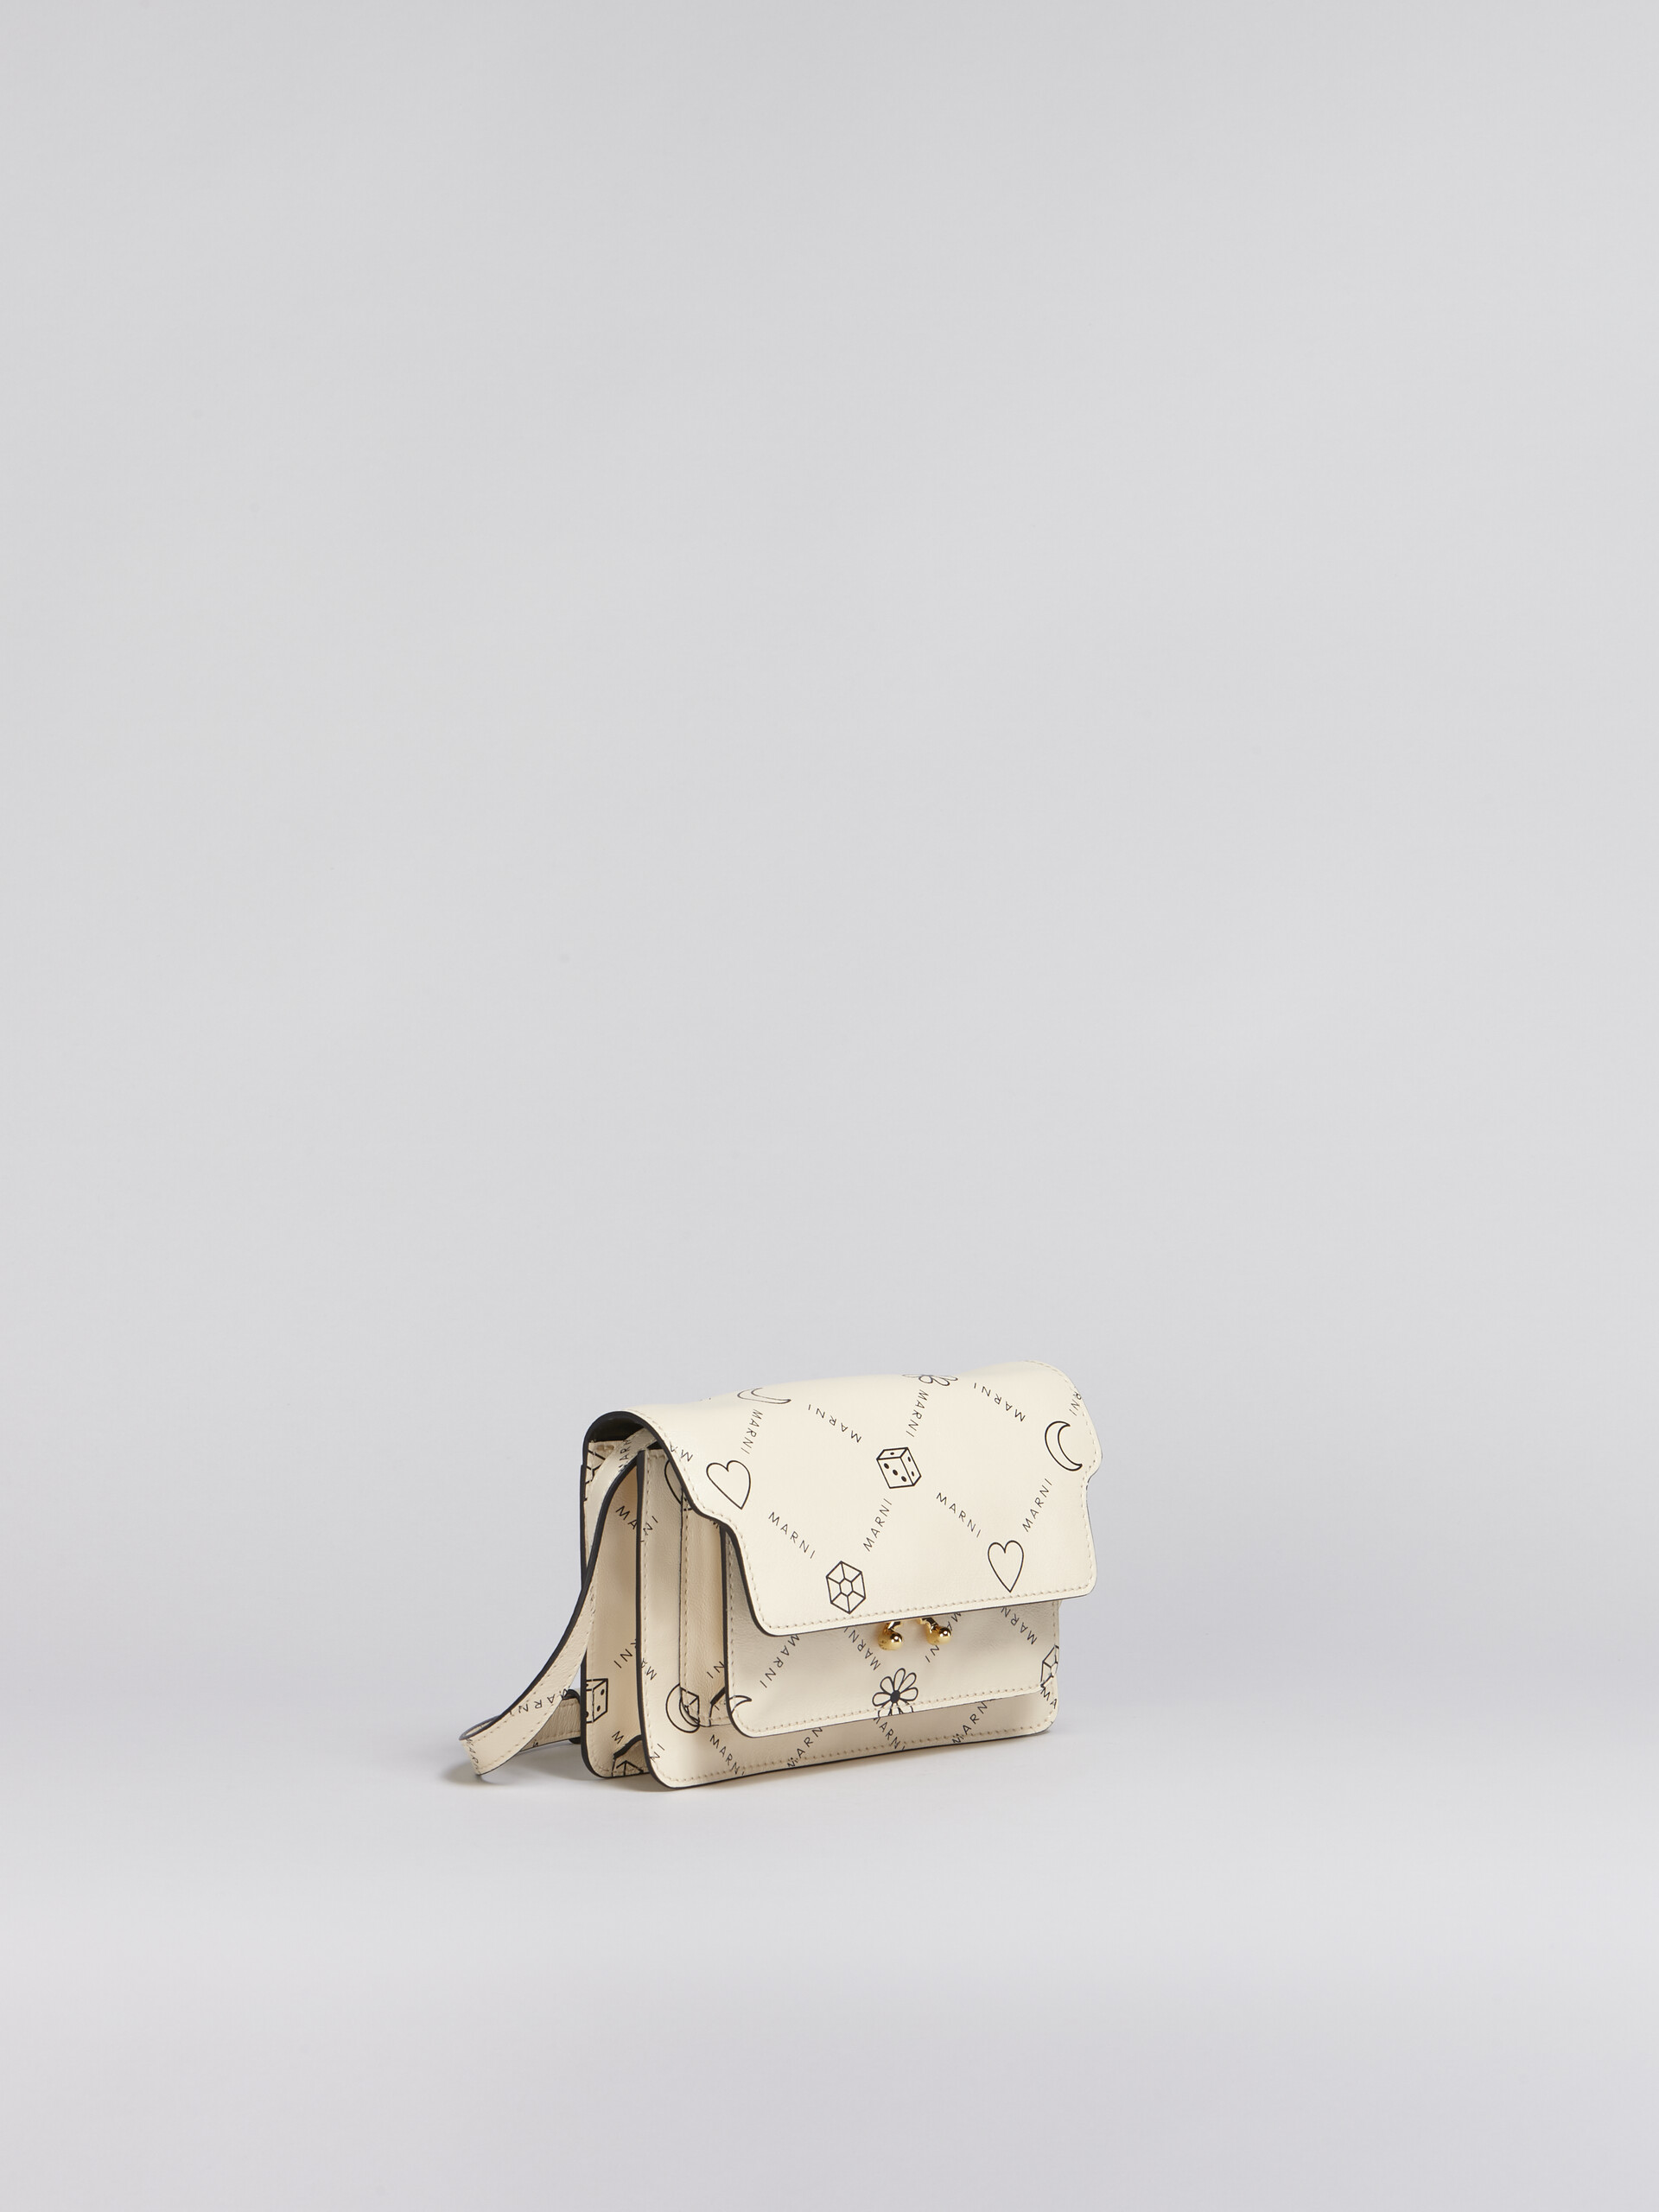 TRUNK SOFT bumbag in white Marnigram print leather - Belt Bags - Image 5